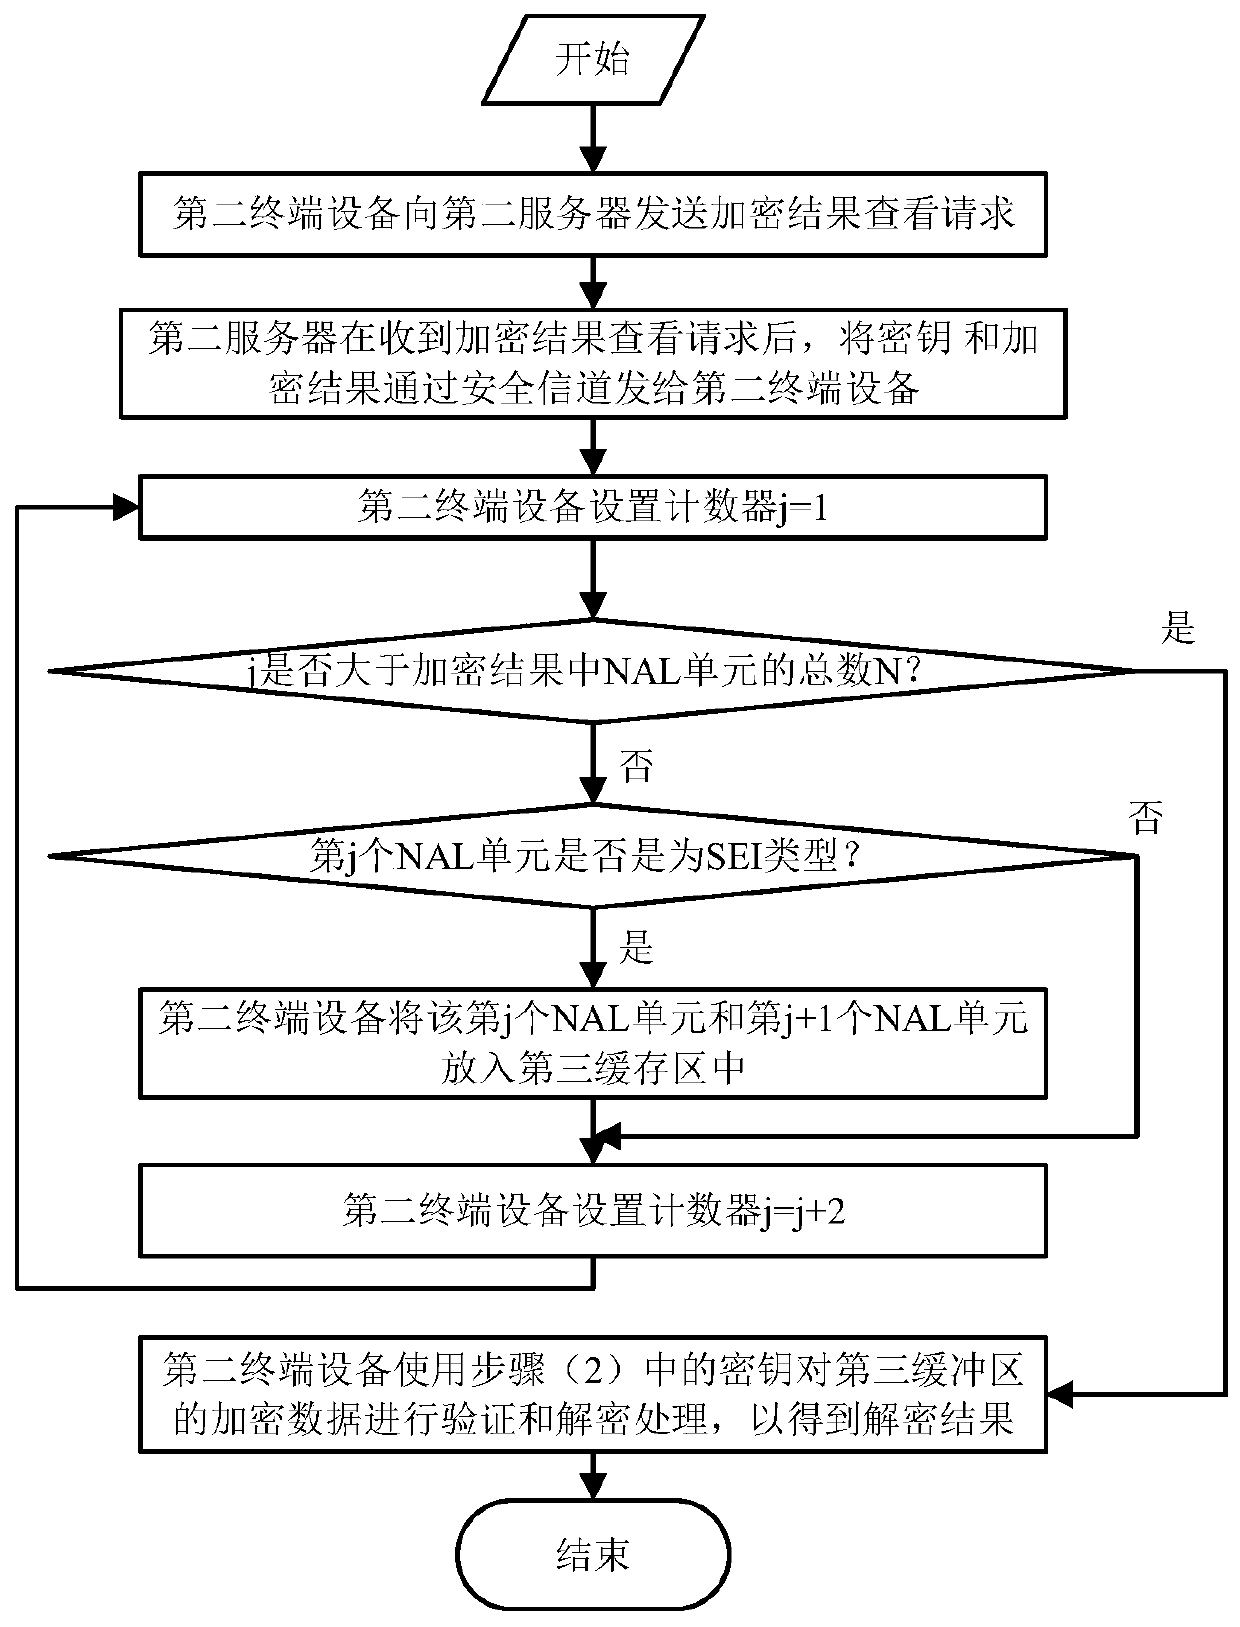 Encryption and decryption method for realizing safe video transmission of power monitoring system